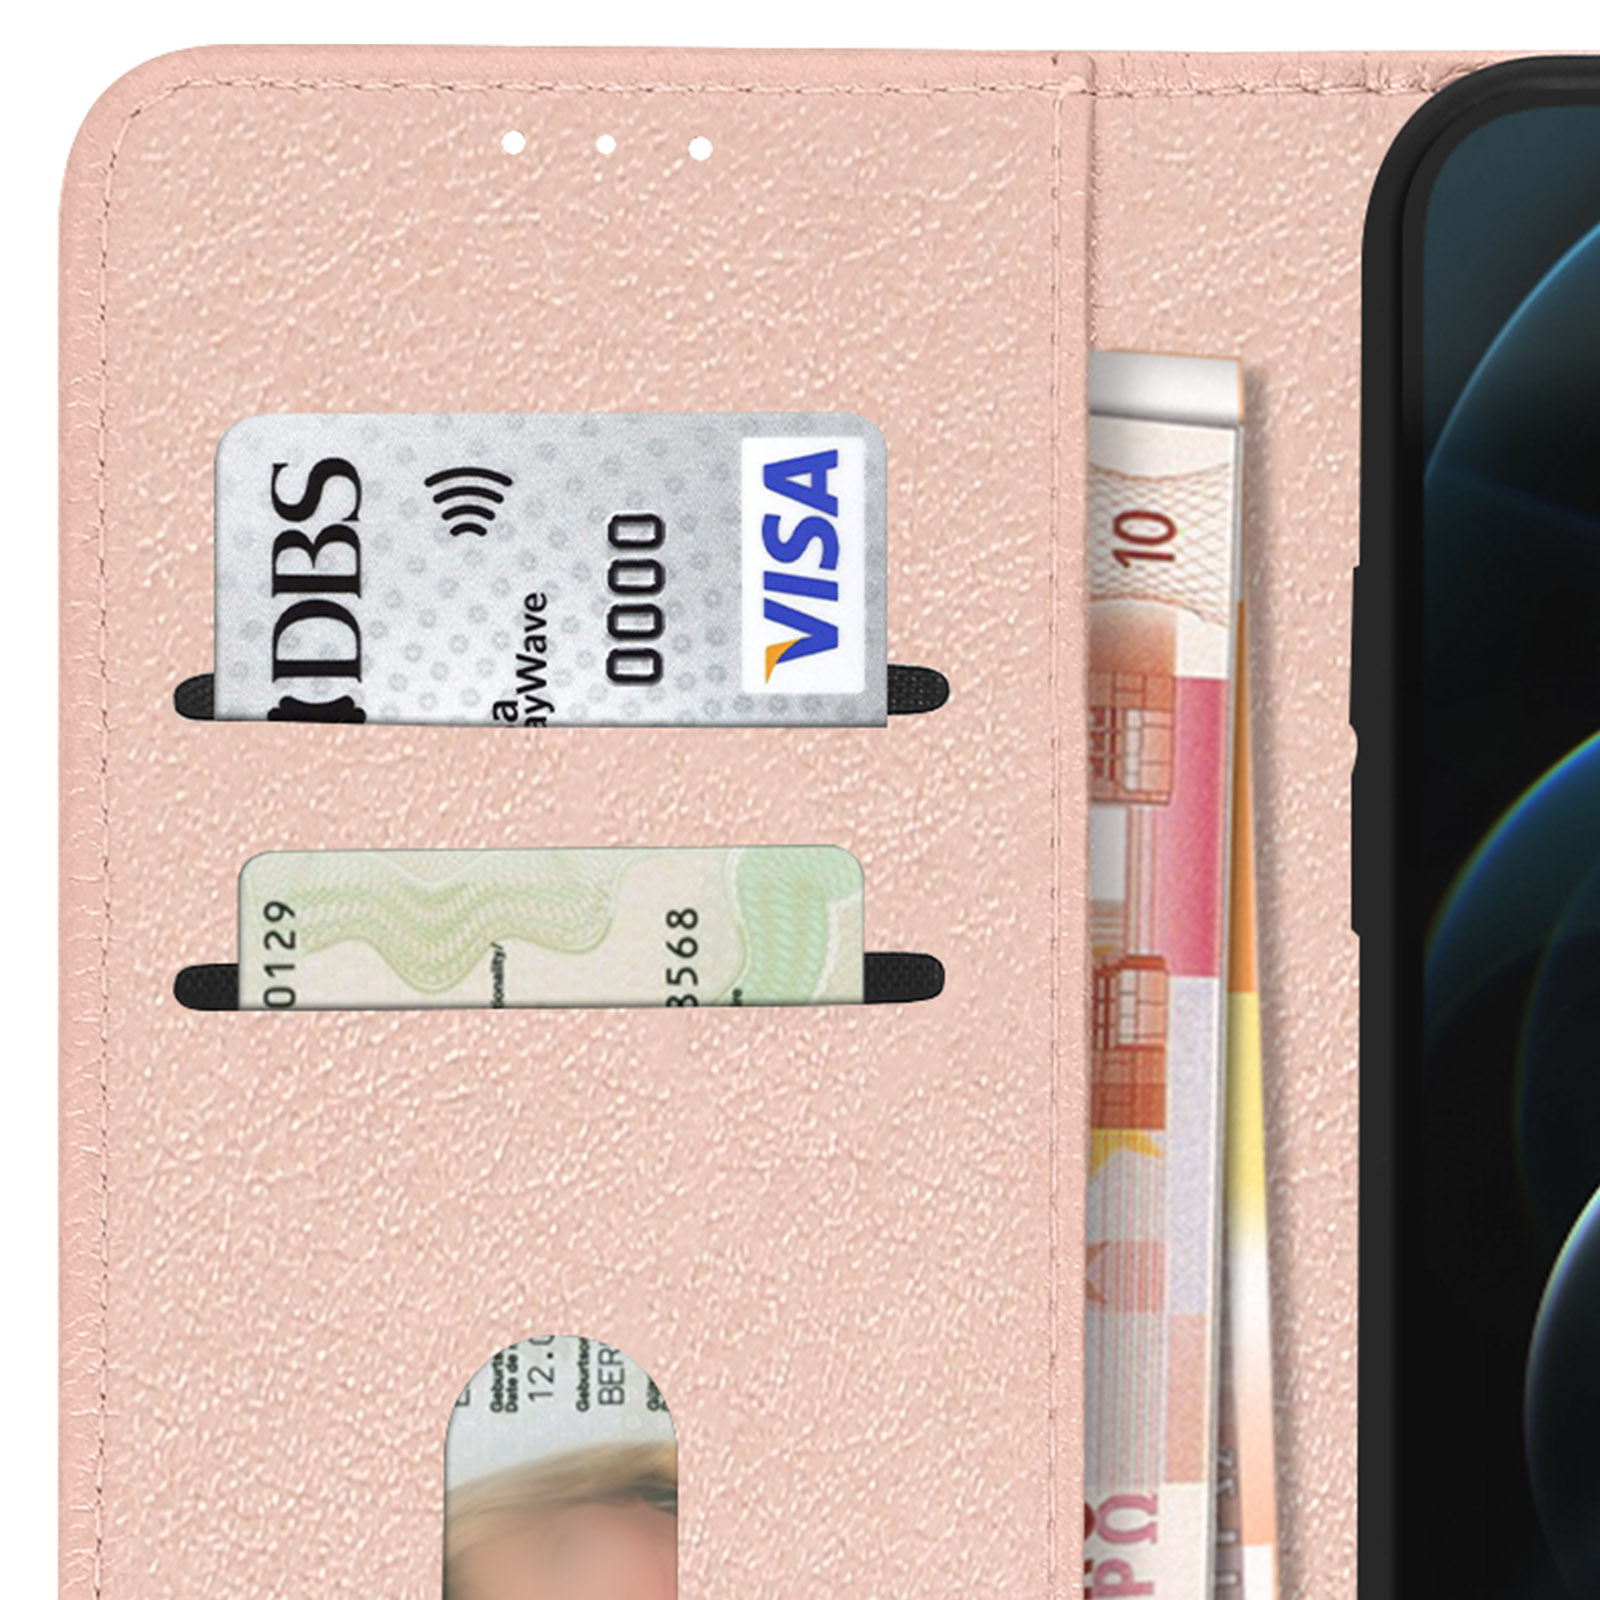 Rosegold 12 Max, Bookcover, Pro iPhone Apple, AVIZAR Chesterfield Series,